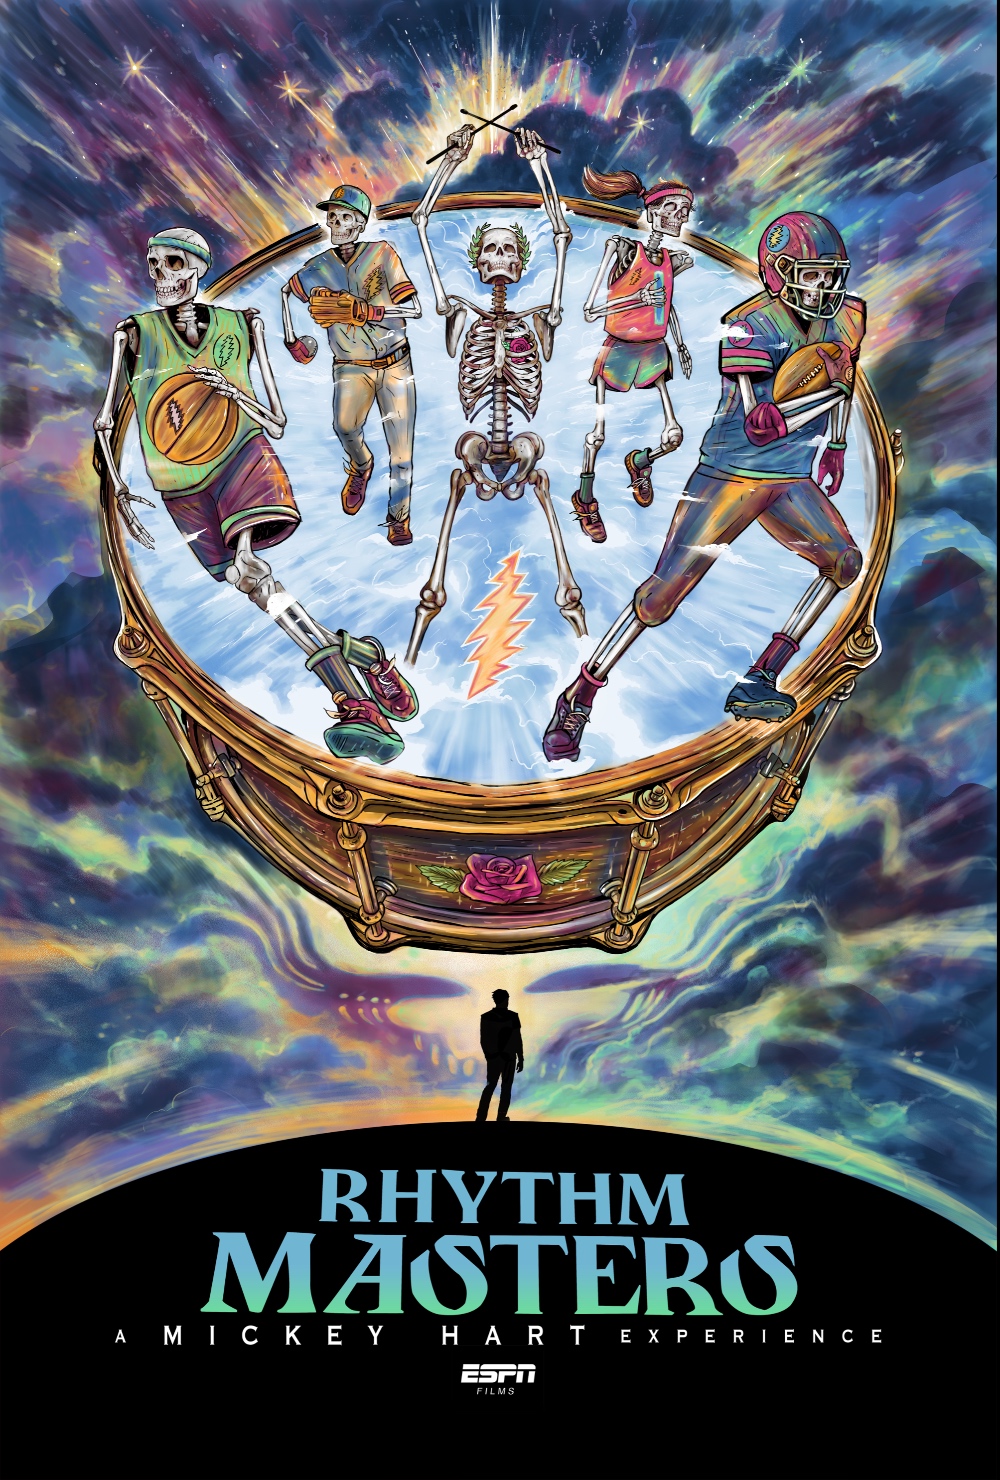 ESPN Films' "Rhythm Masters: A Mickey Hart Experience" to Premiere August 14